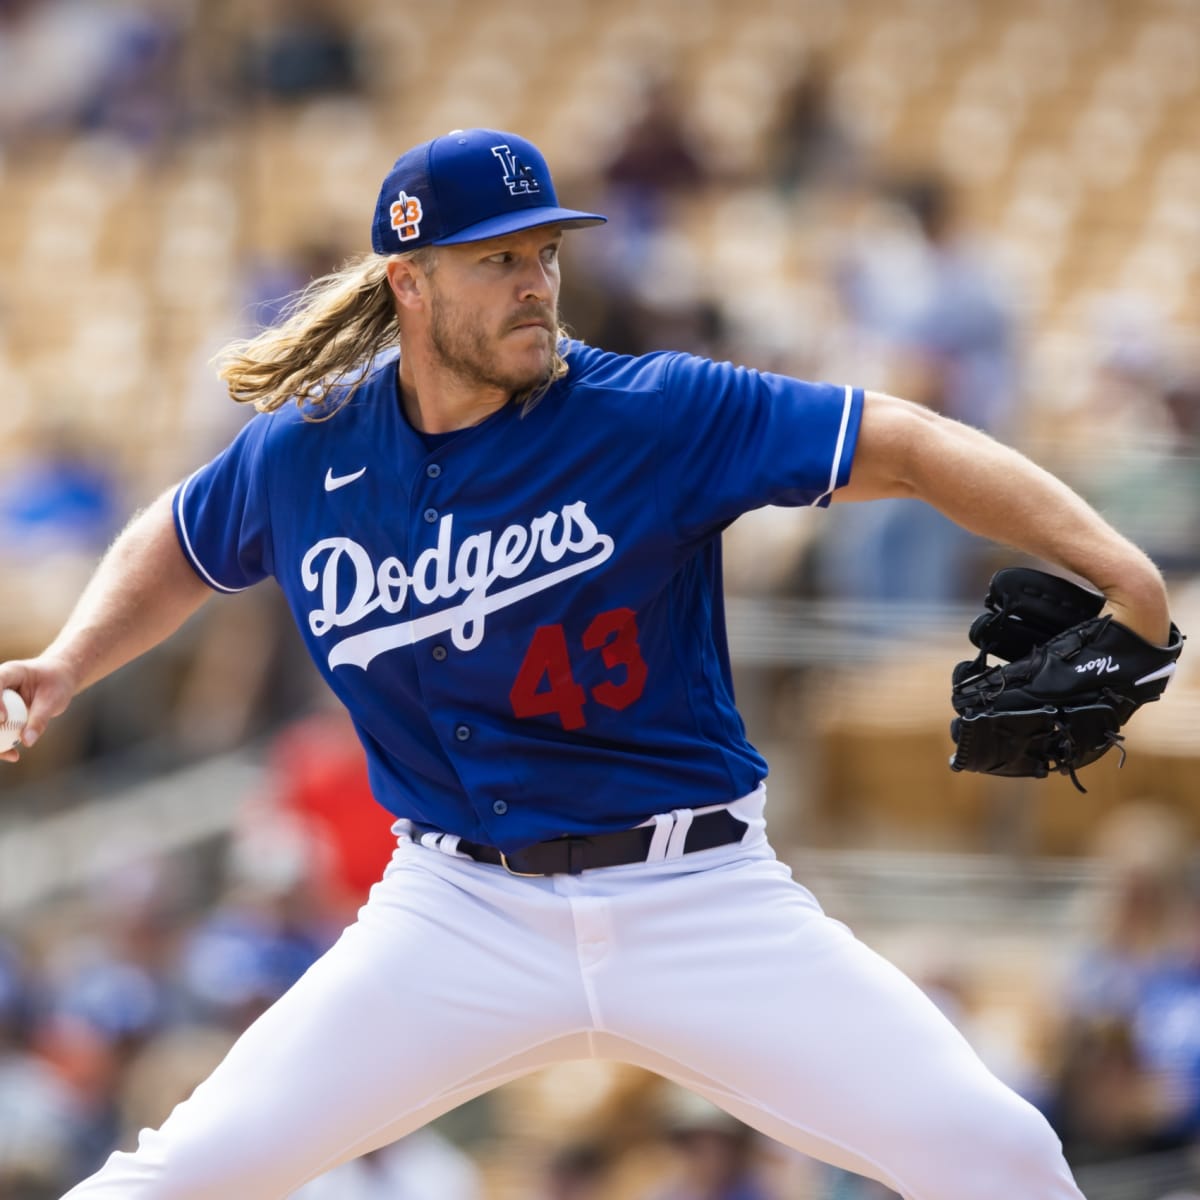 Dodgers News: MLB Writer Not Confident in Noah Syndergaard